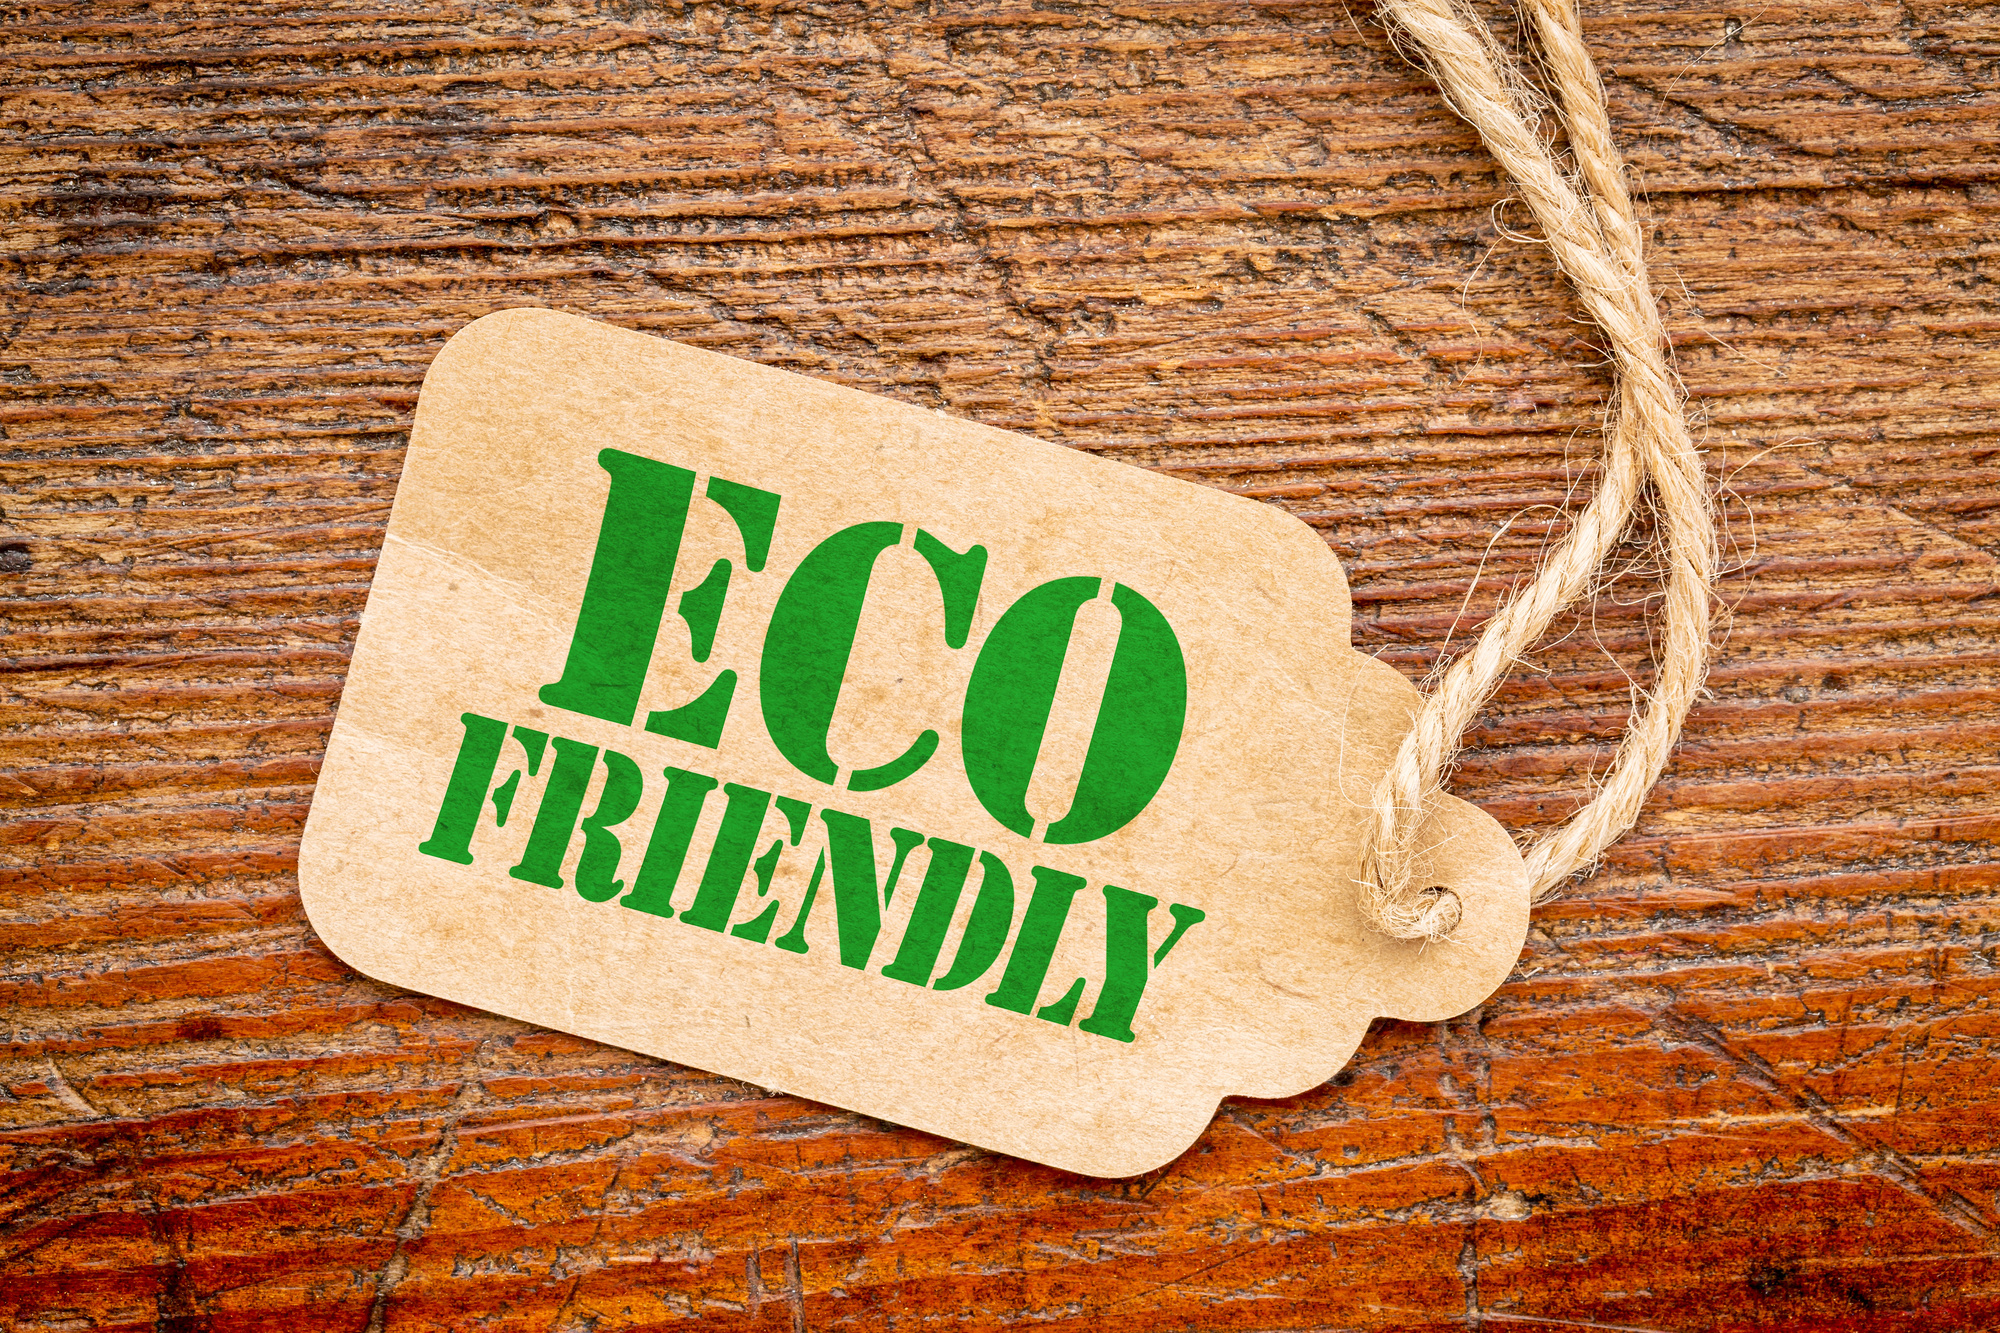 eco-friendly products